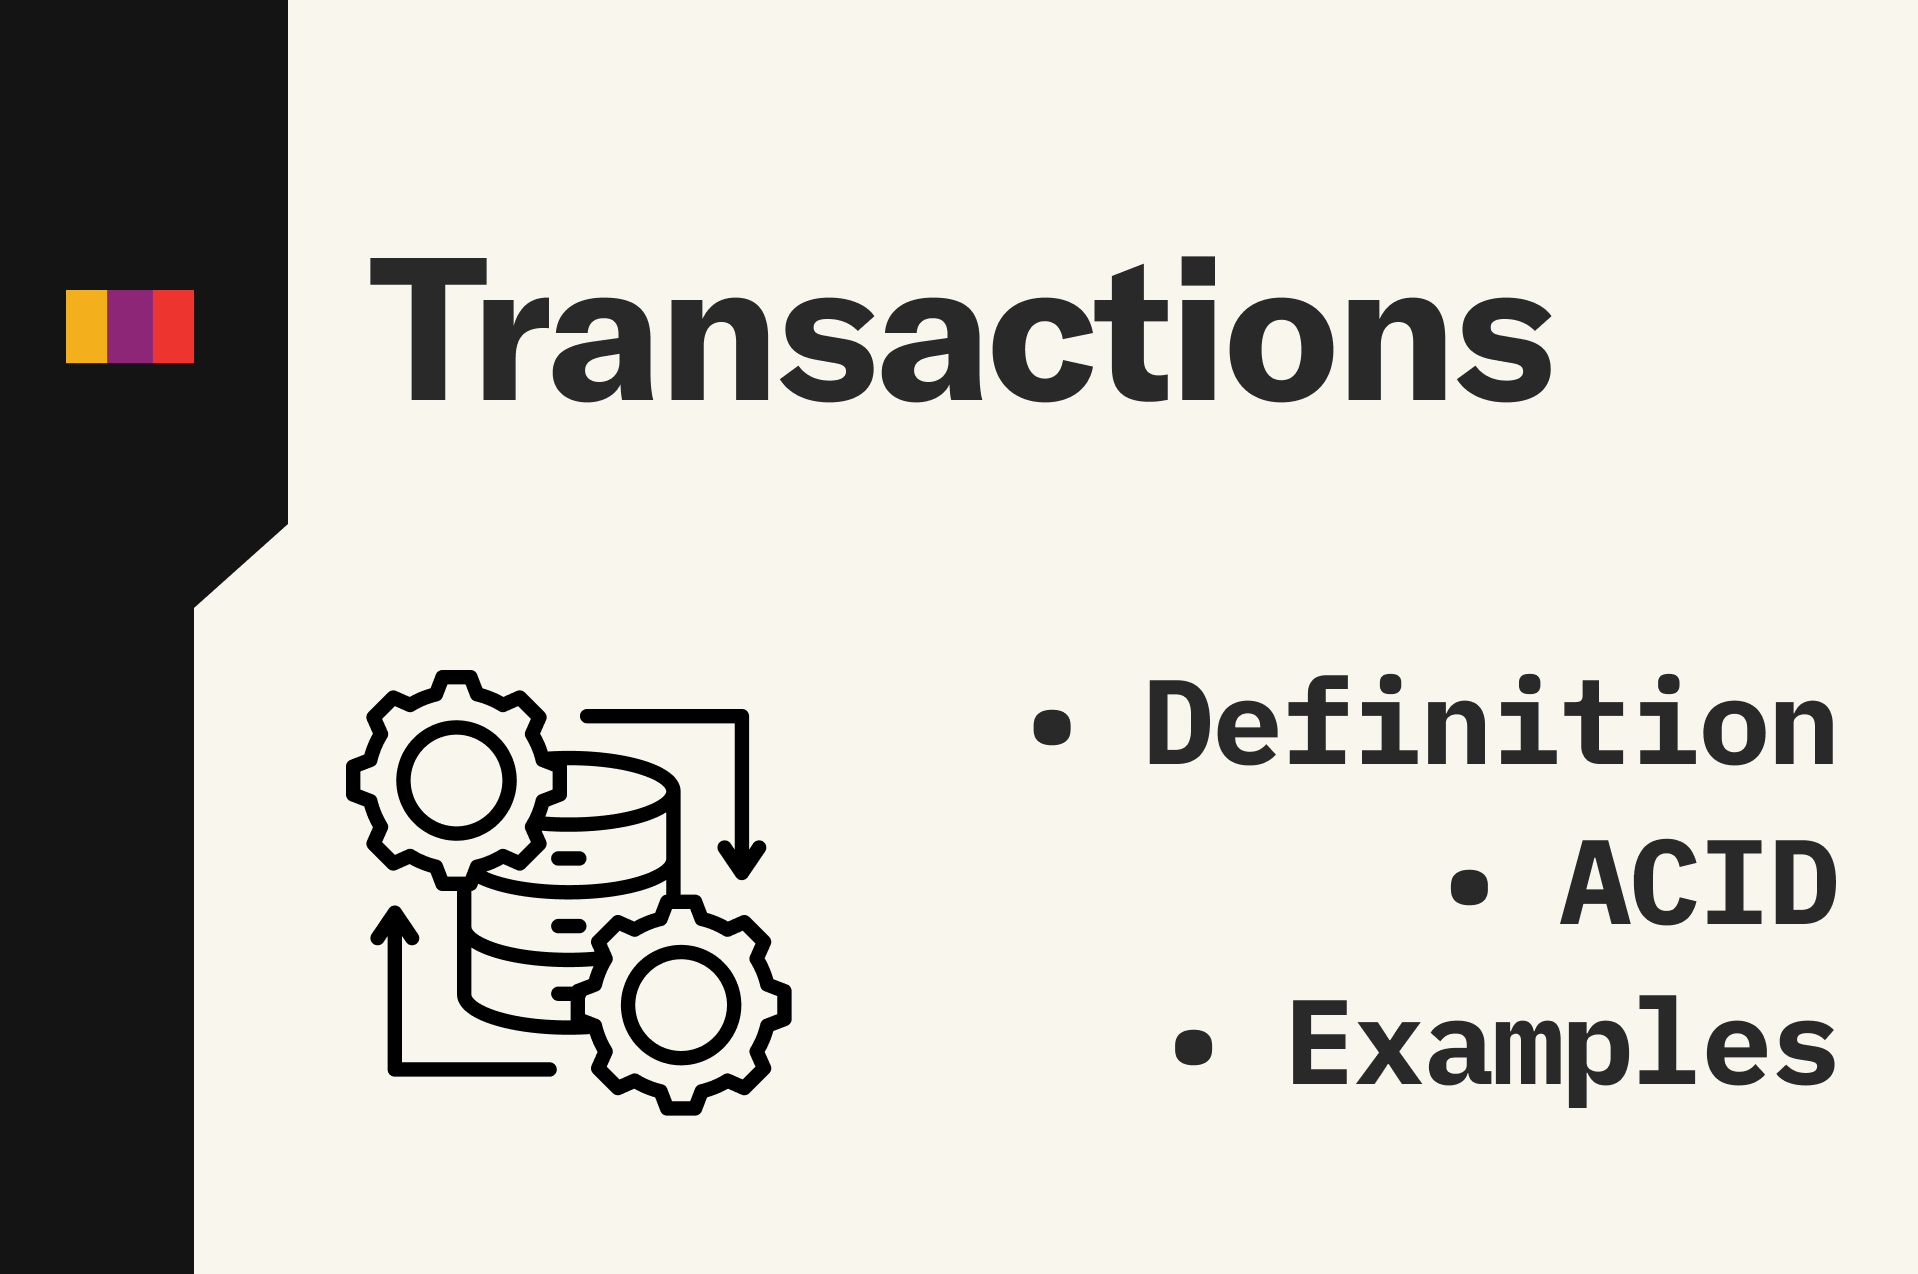 Transactions: definition, ACID, and examples